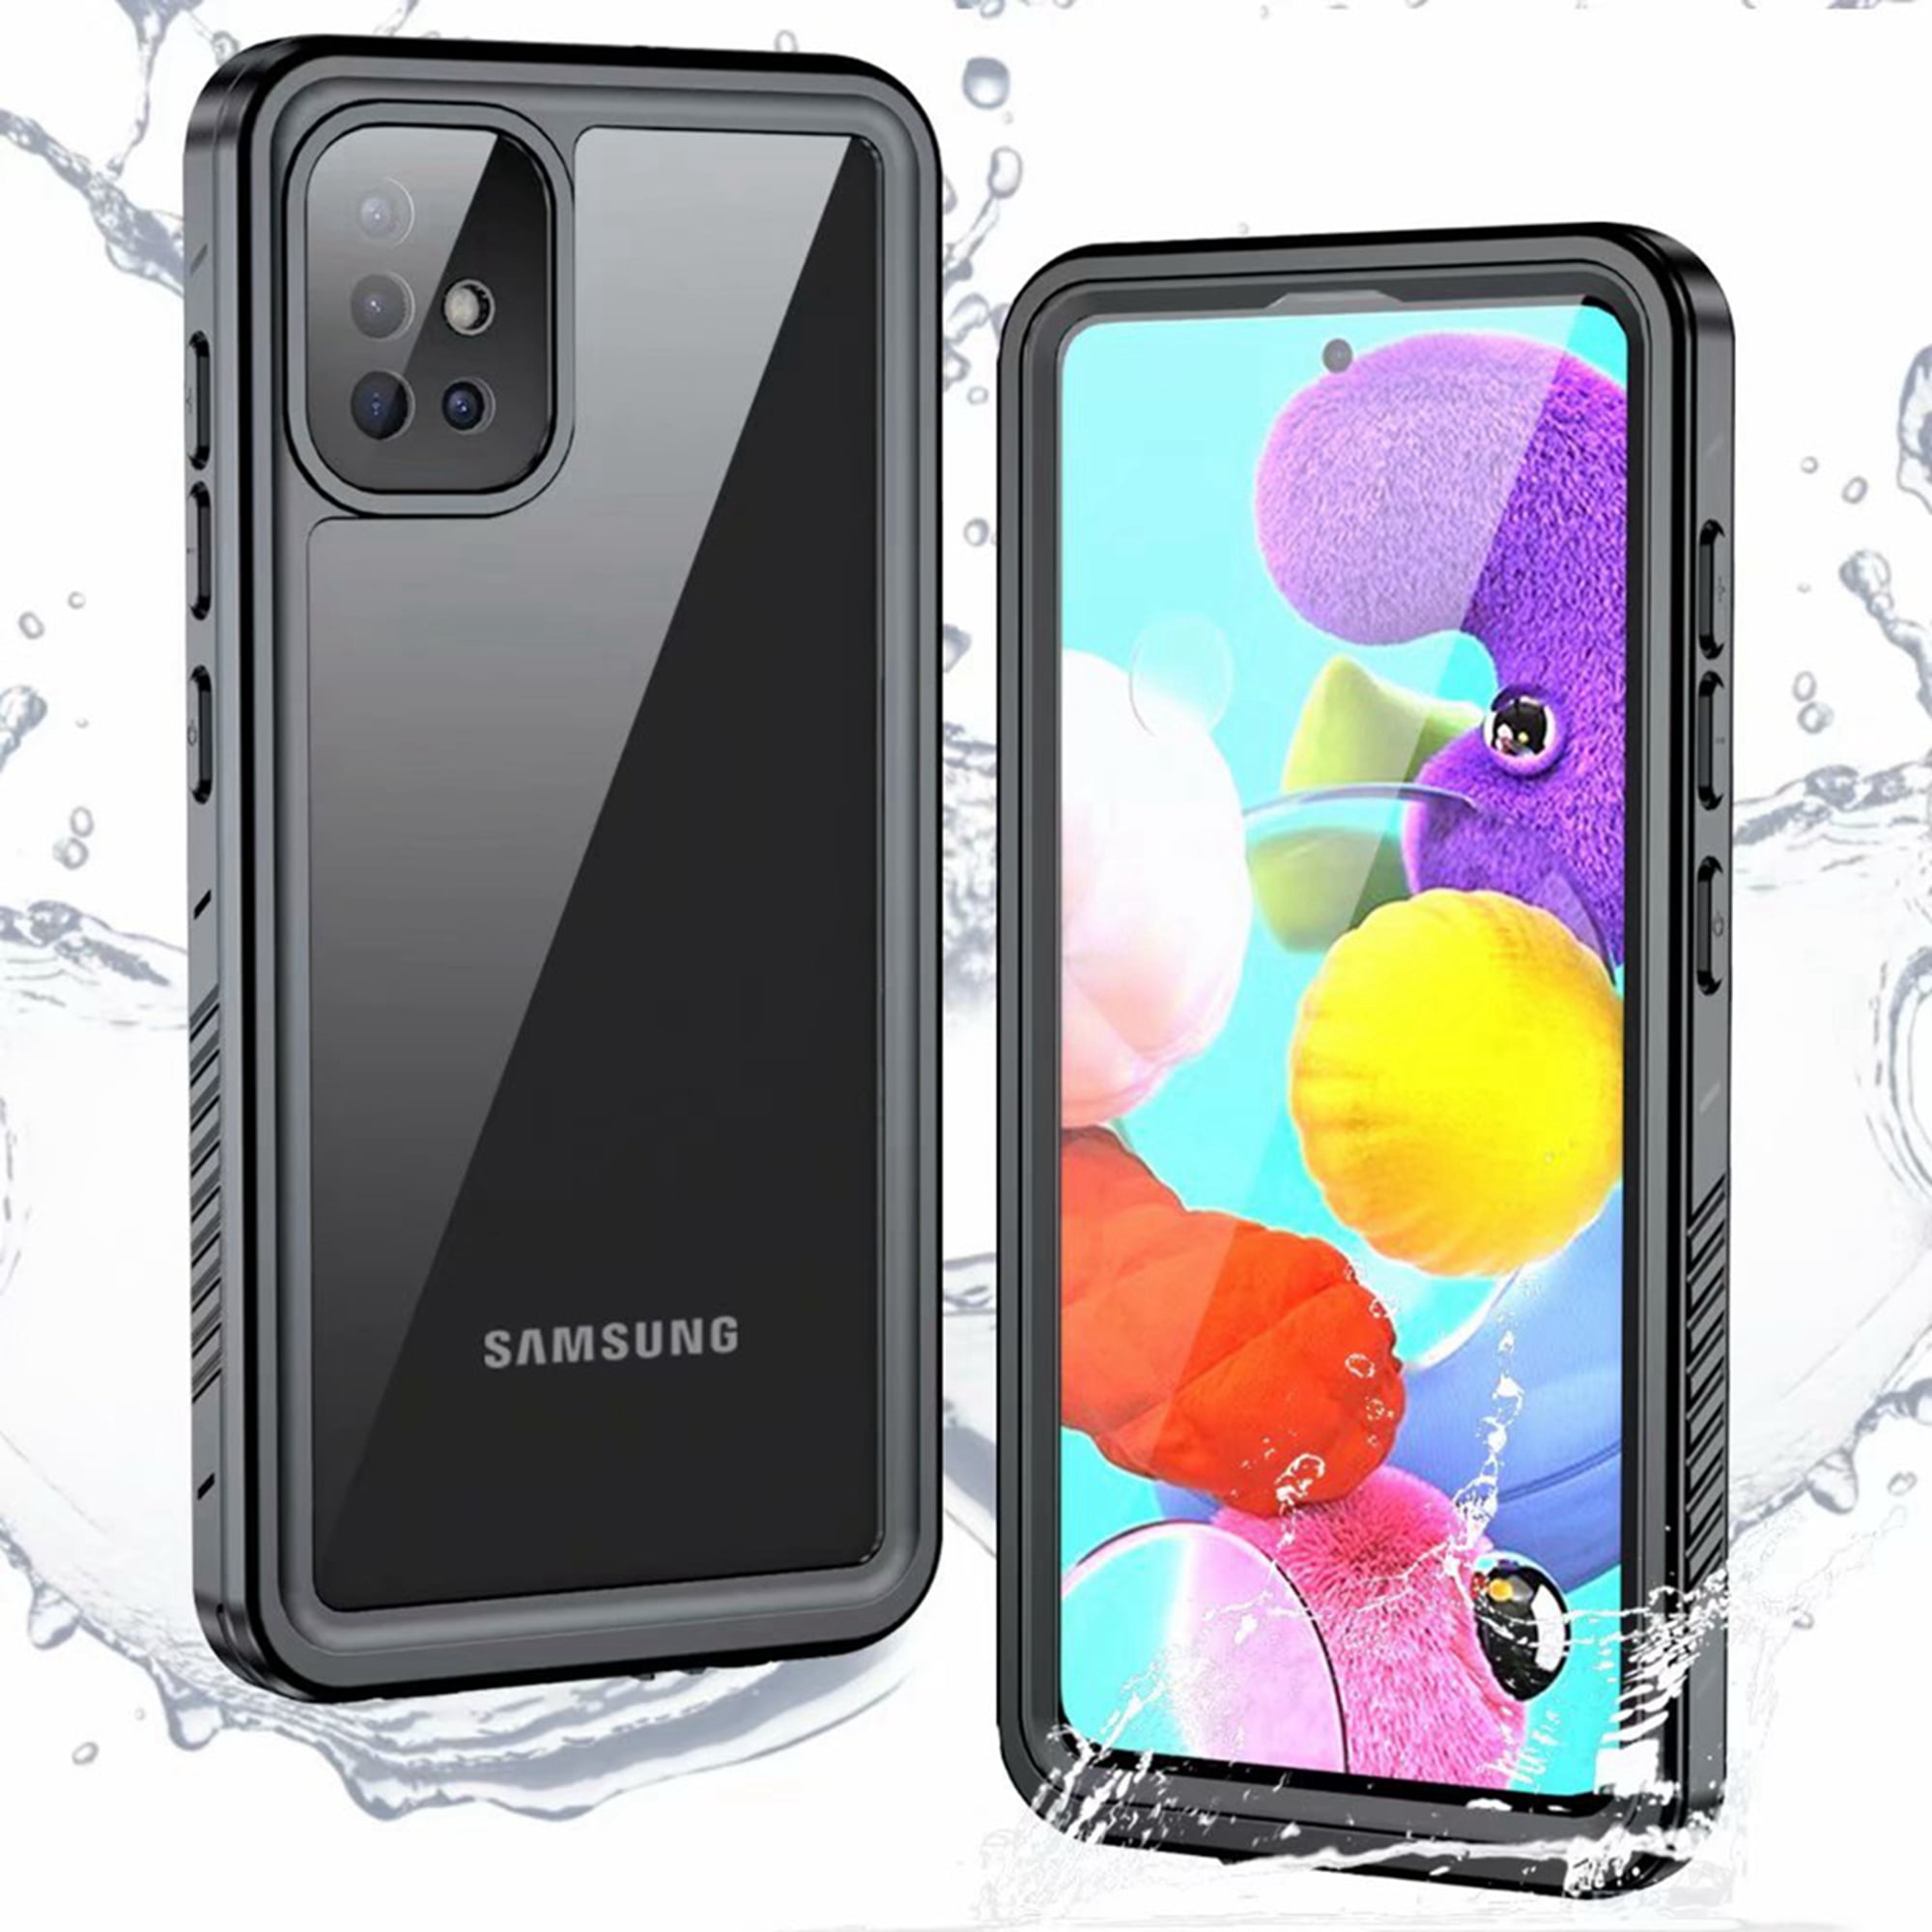 IP68 Waterproof Dustproof Shockproof Case with Built-in Screen Protector Full Body Sealed Underwater Protective Clear Cover for Galaxy A51 4G Lanhiem Samsung Galaxy A51 Case Black 